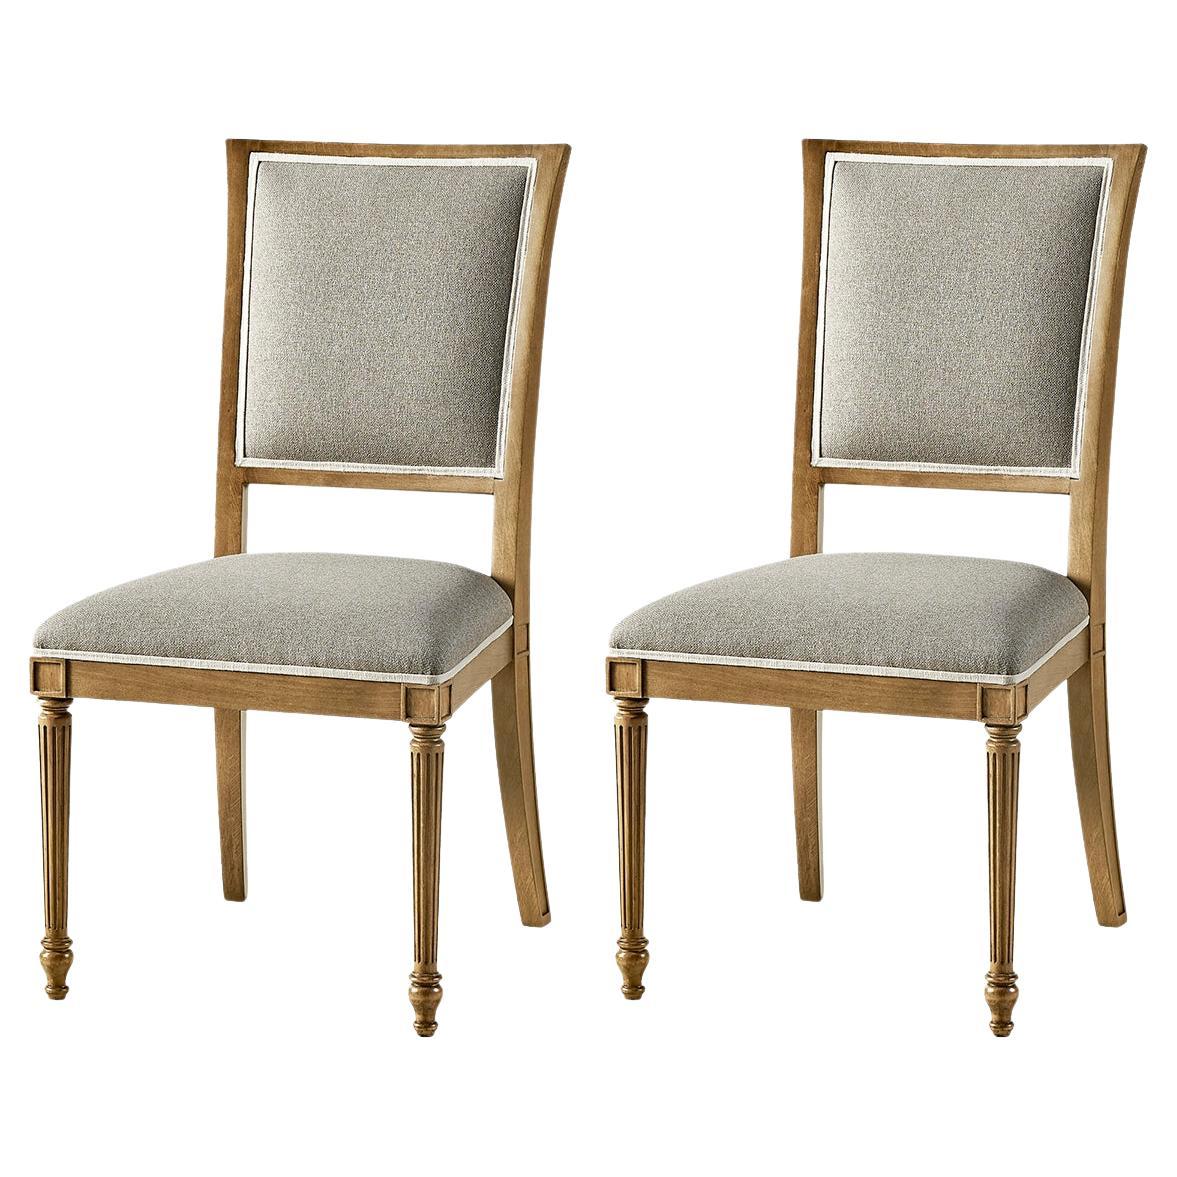 Classic French Dining Chairs in Cherry Finish